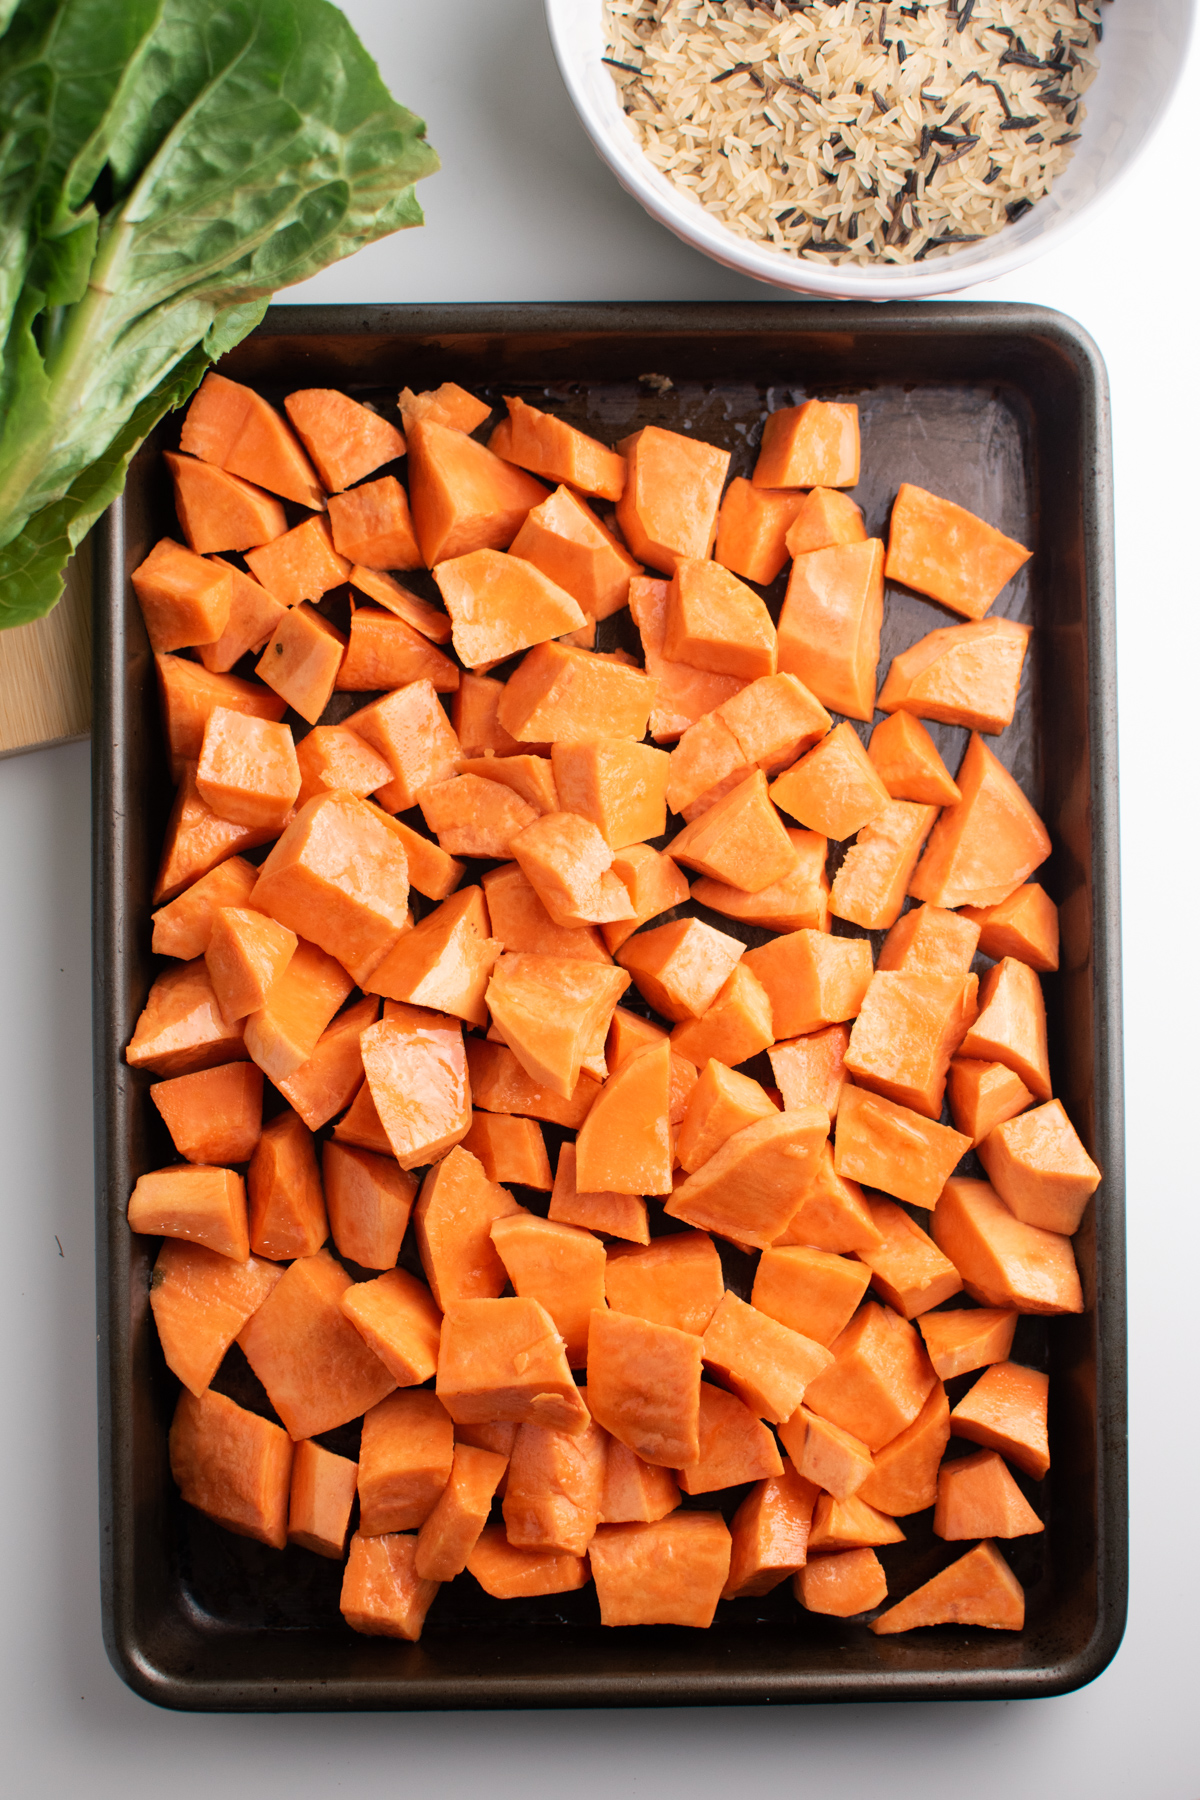 Cubed sweet potato pieces on sheet pan next to lettuce and wild rice.